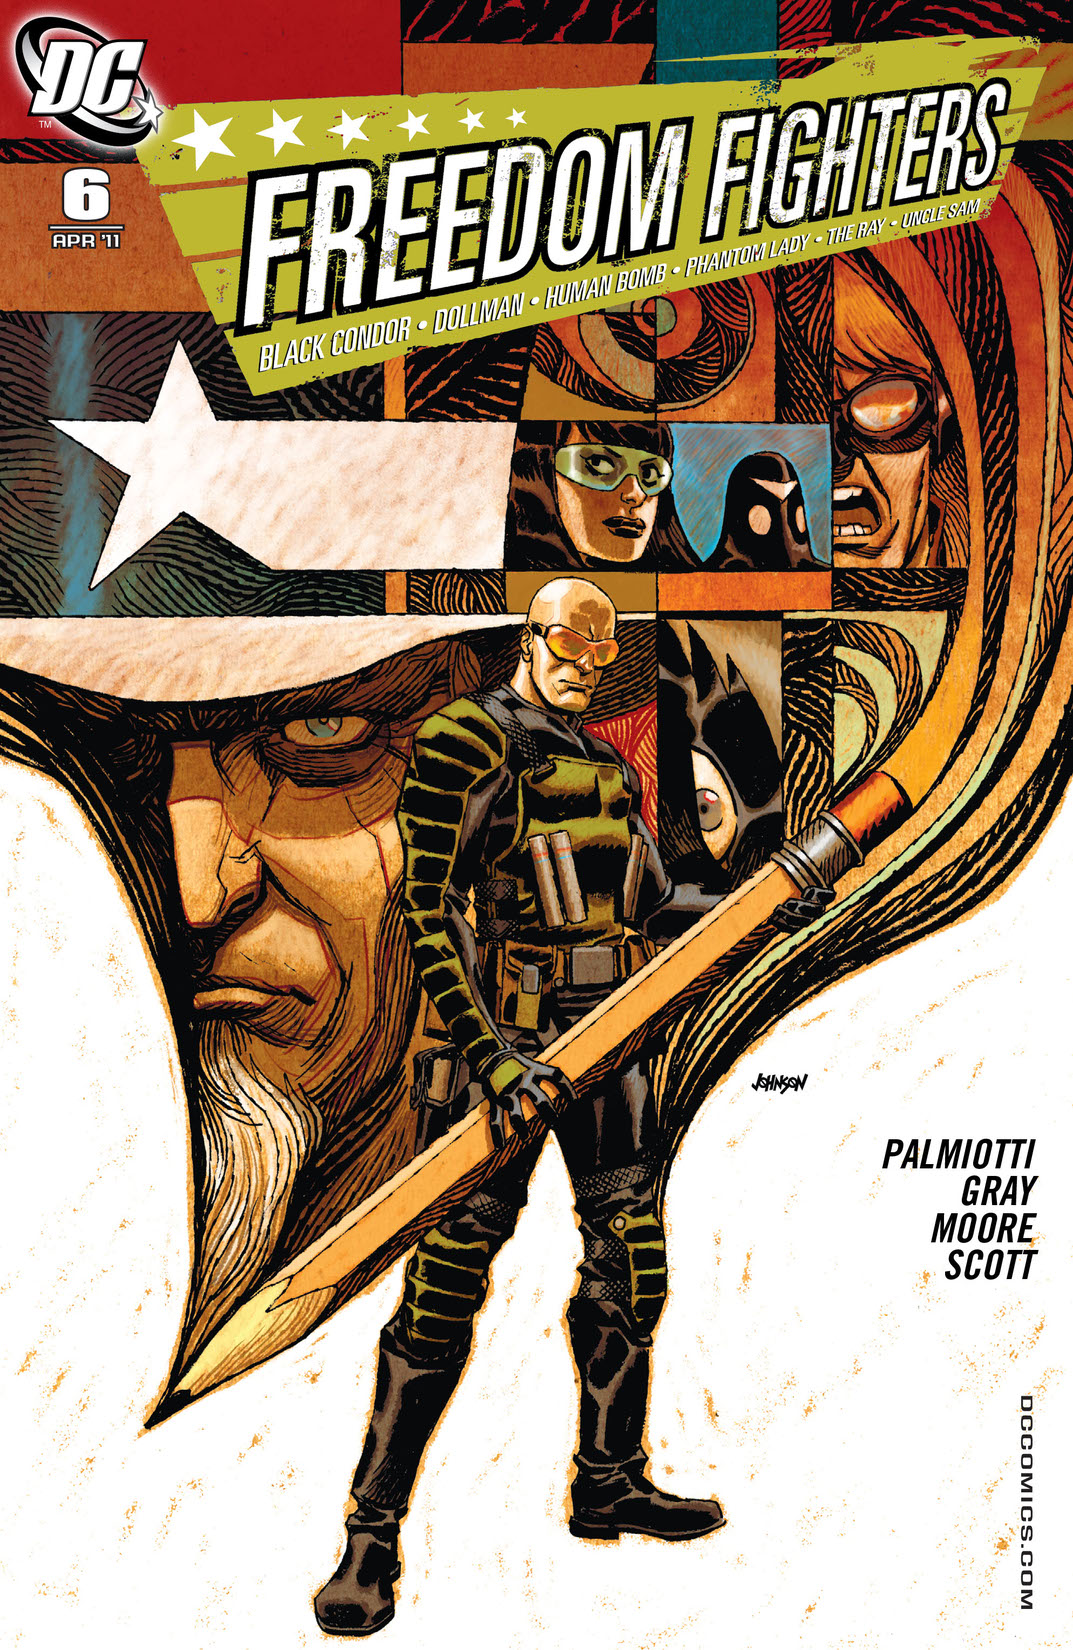 Freedom Fighters (2010-) #6 preview images